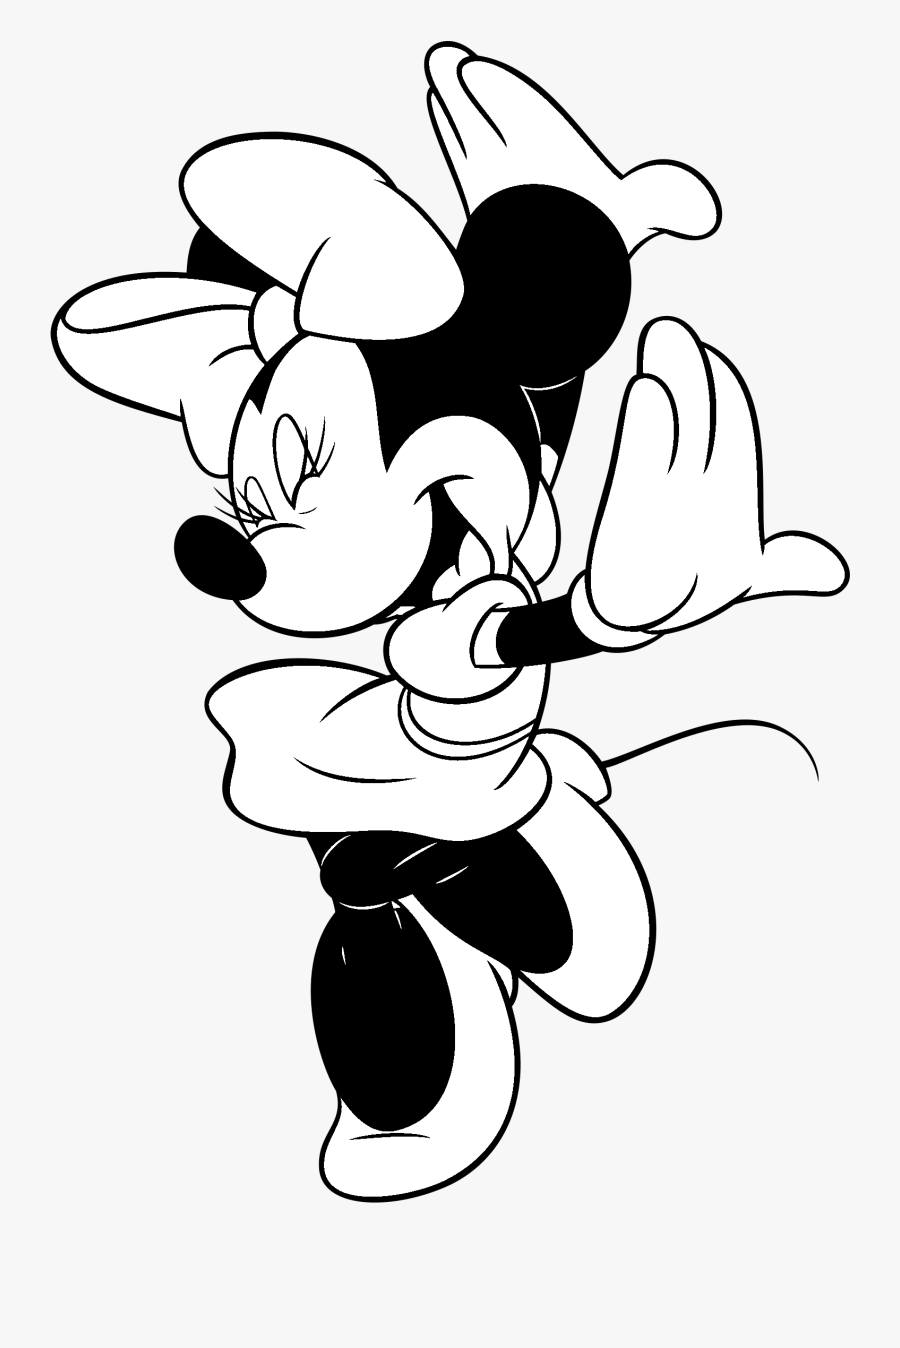 Minnie Mouse Logo Black And White - Disney Minnie Mouse Vector, Transparent Clipart